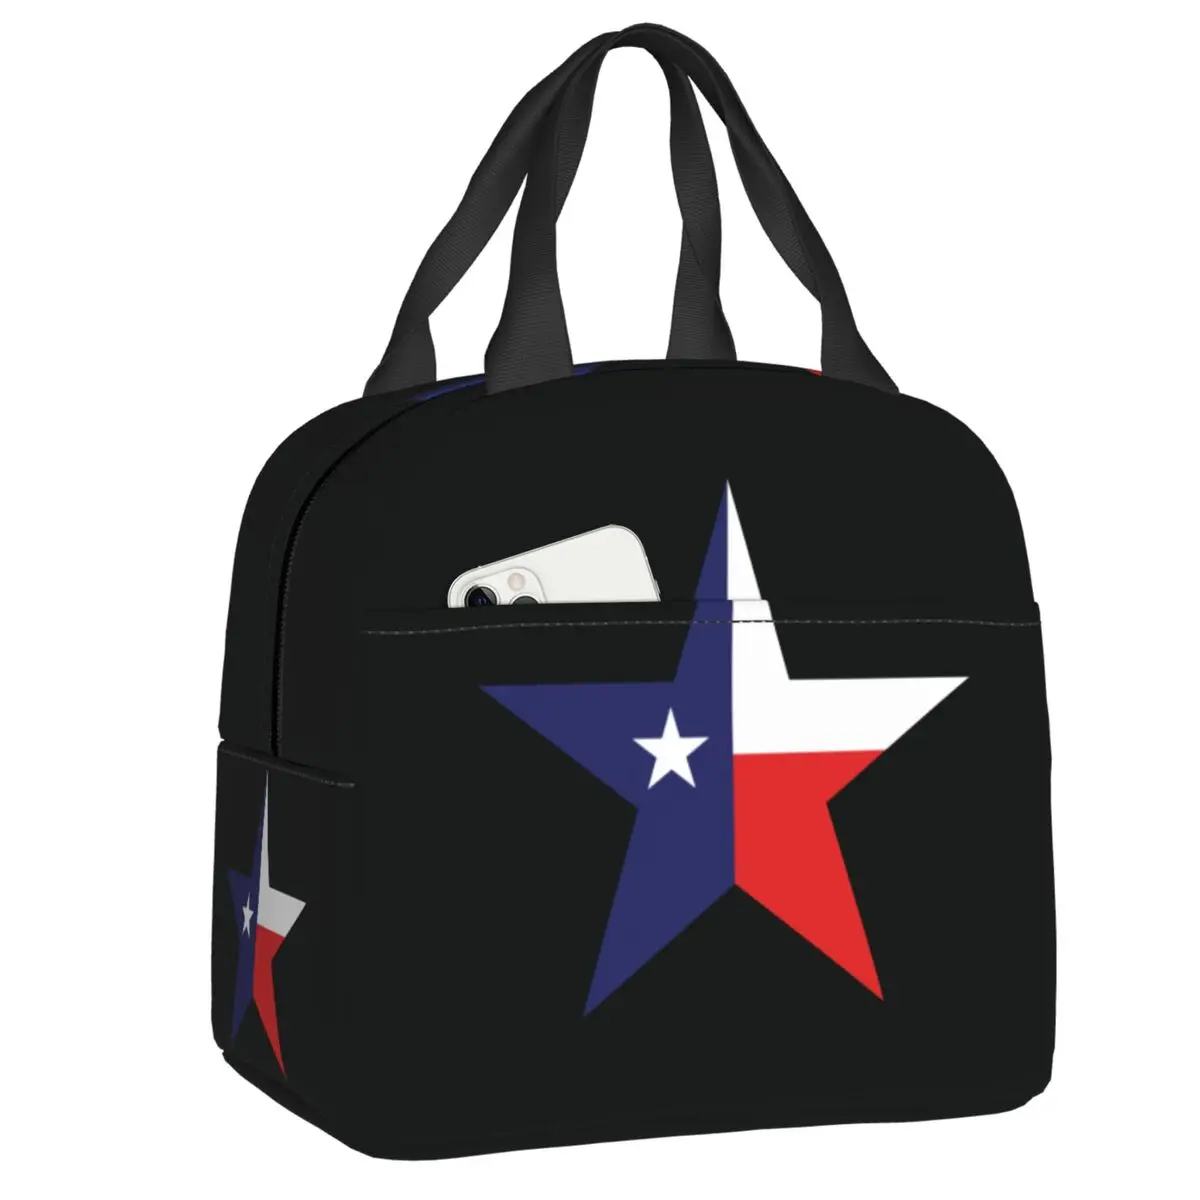 

Texas Lone Star Logo Insulated Lunch Tote Bag for Women Flag Of Texas Resuable Thermal Cooler Bento Box Kids School Children